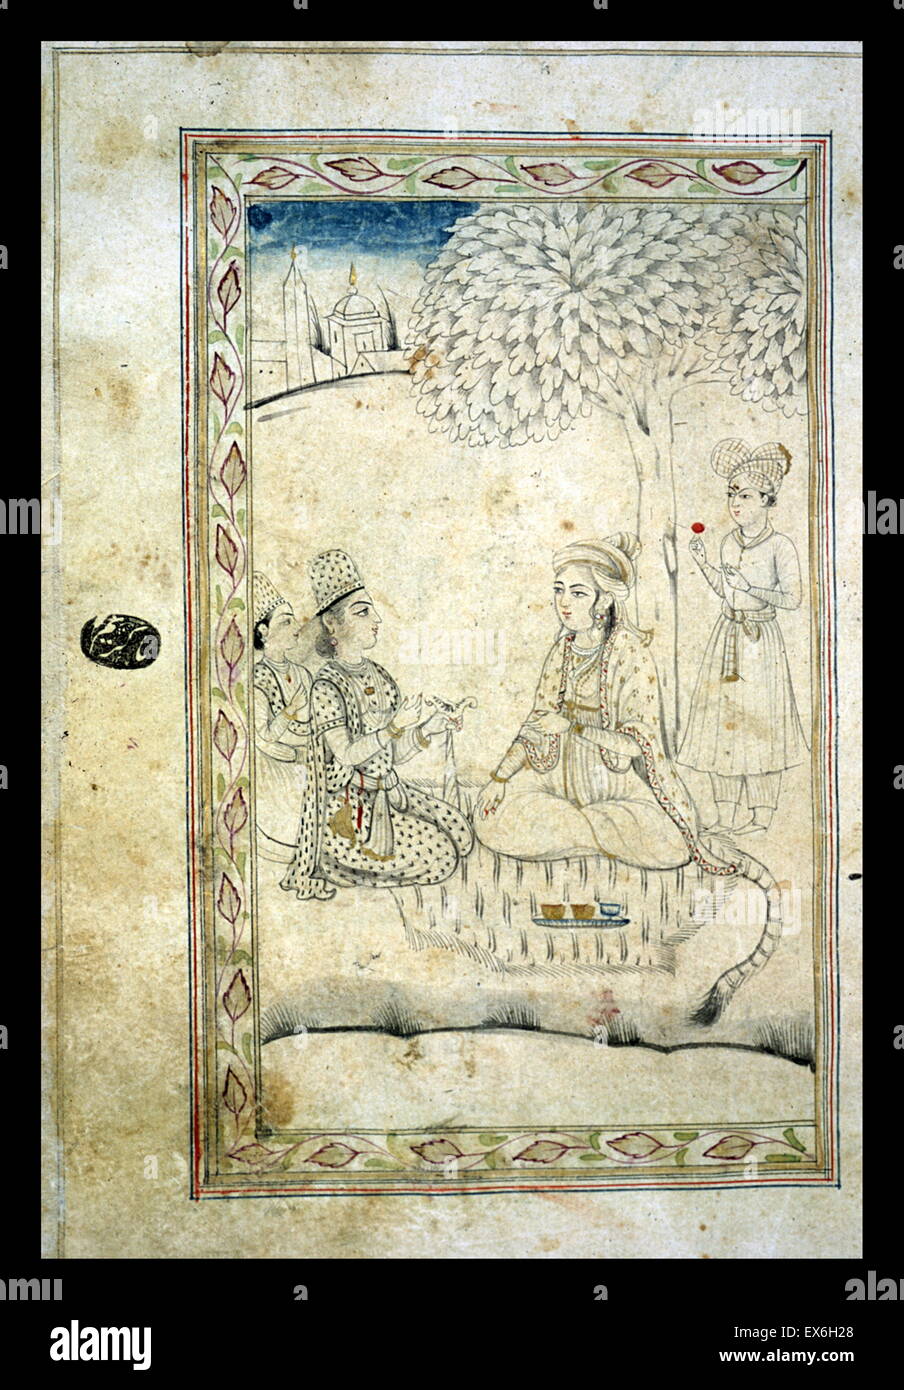 late Mughal style miniature A full-page miniature drawing in black ink with gilt and tiny blue and red accents. A turbaned figure sits cross-legged on a tiger skin under a tree, with an attendant behind and two courtiers kneeling in front. The silhouette Stock Photo